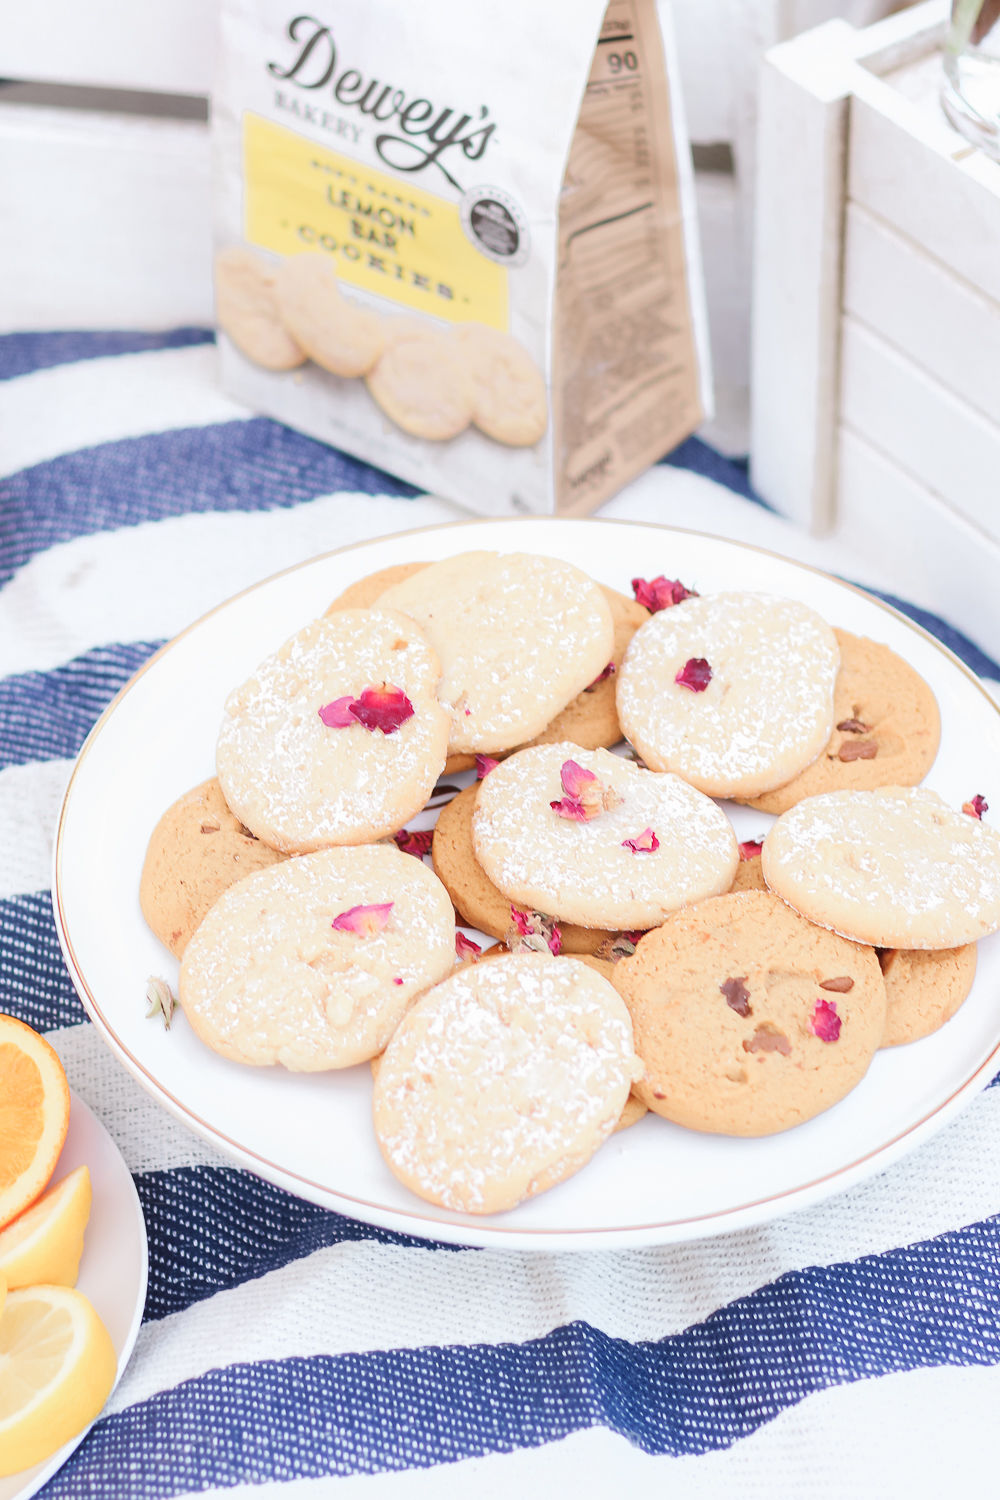 Dewey's Bakery Lemon Bar Cookies with dried red rosebuds and rose petals, tea party picnic ideas